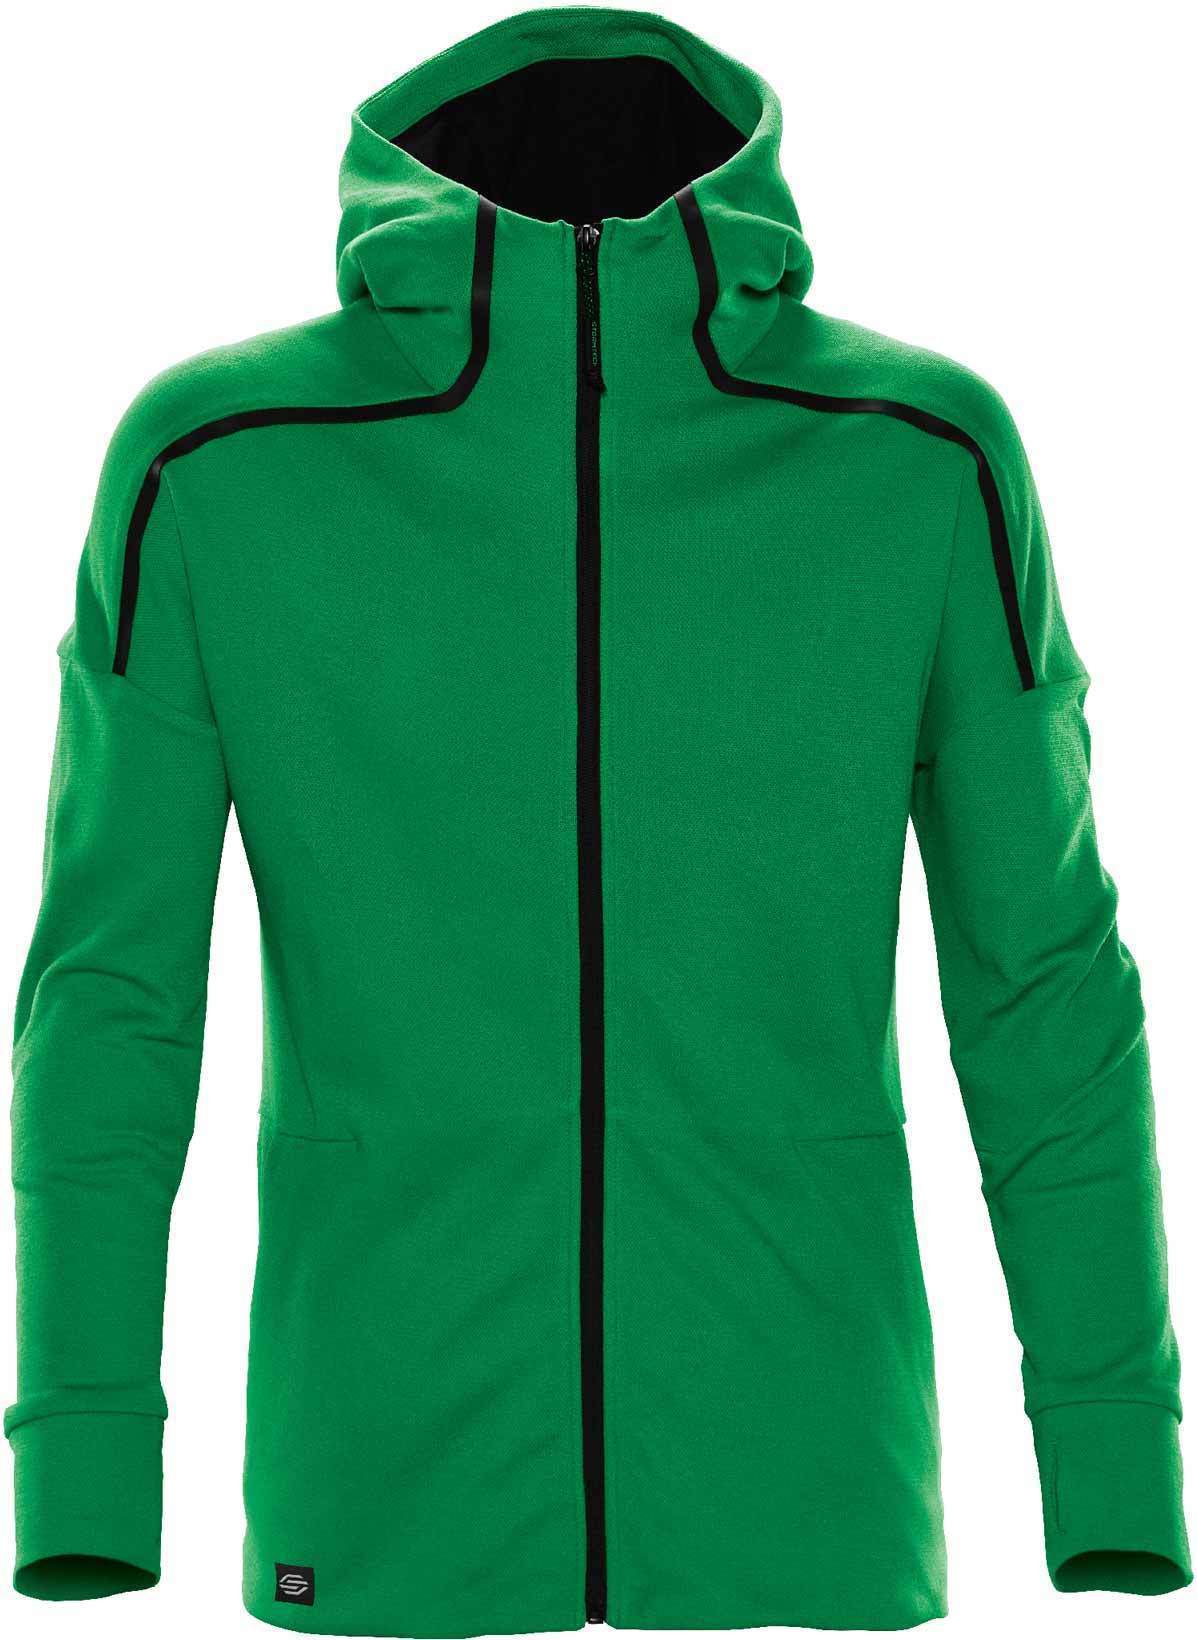 MH-1 Helix thermal hoody pour homme